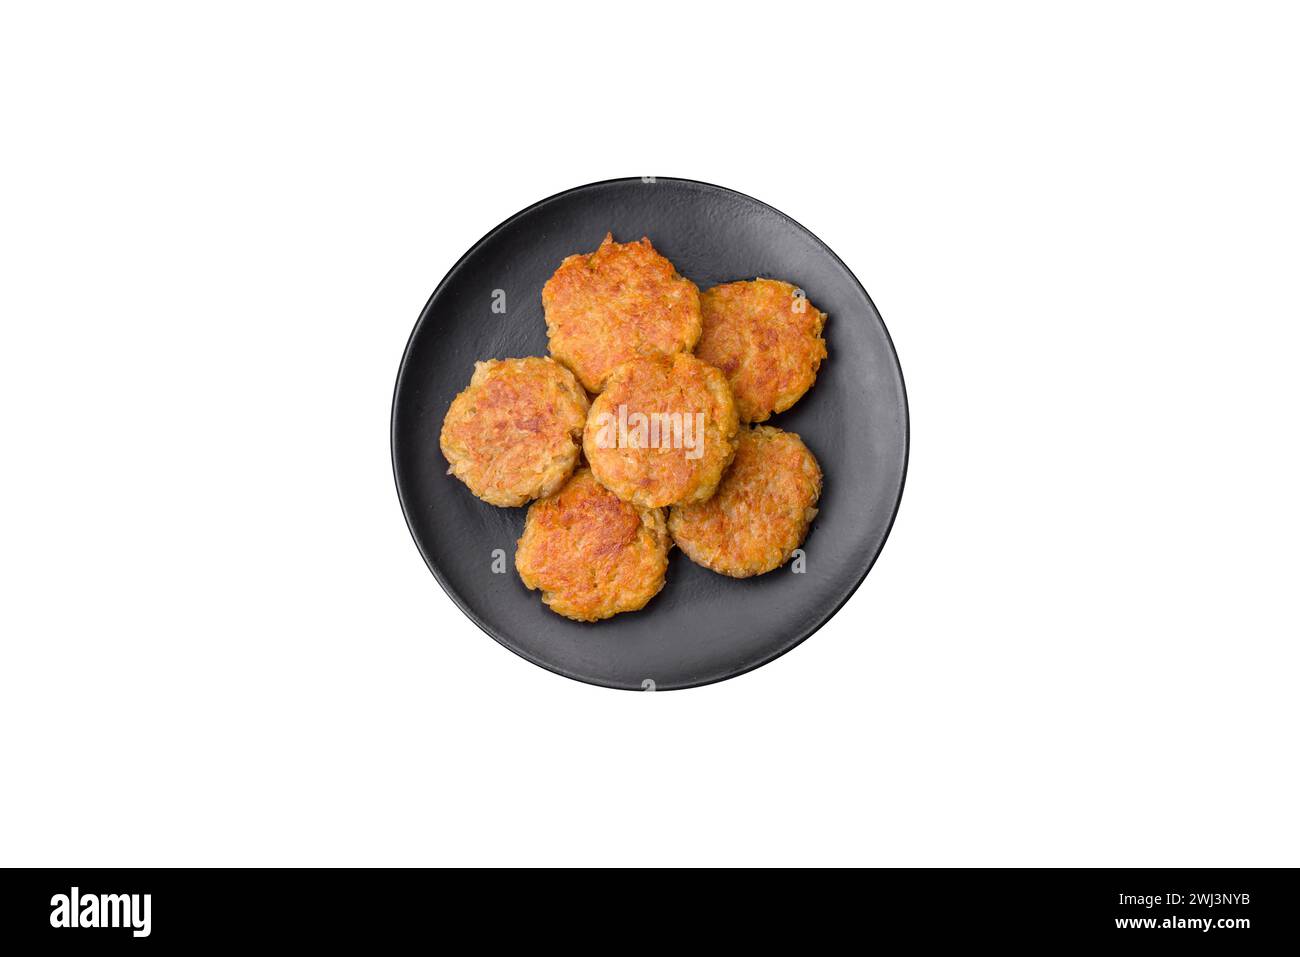 Delicious hearty vegetarian or vegan dish in the form of cutlets or patties Stock Photo